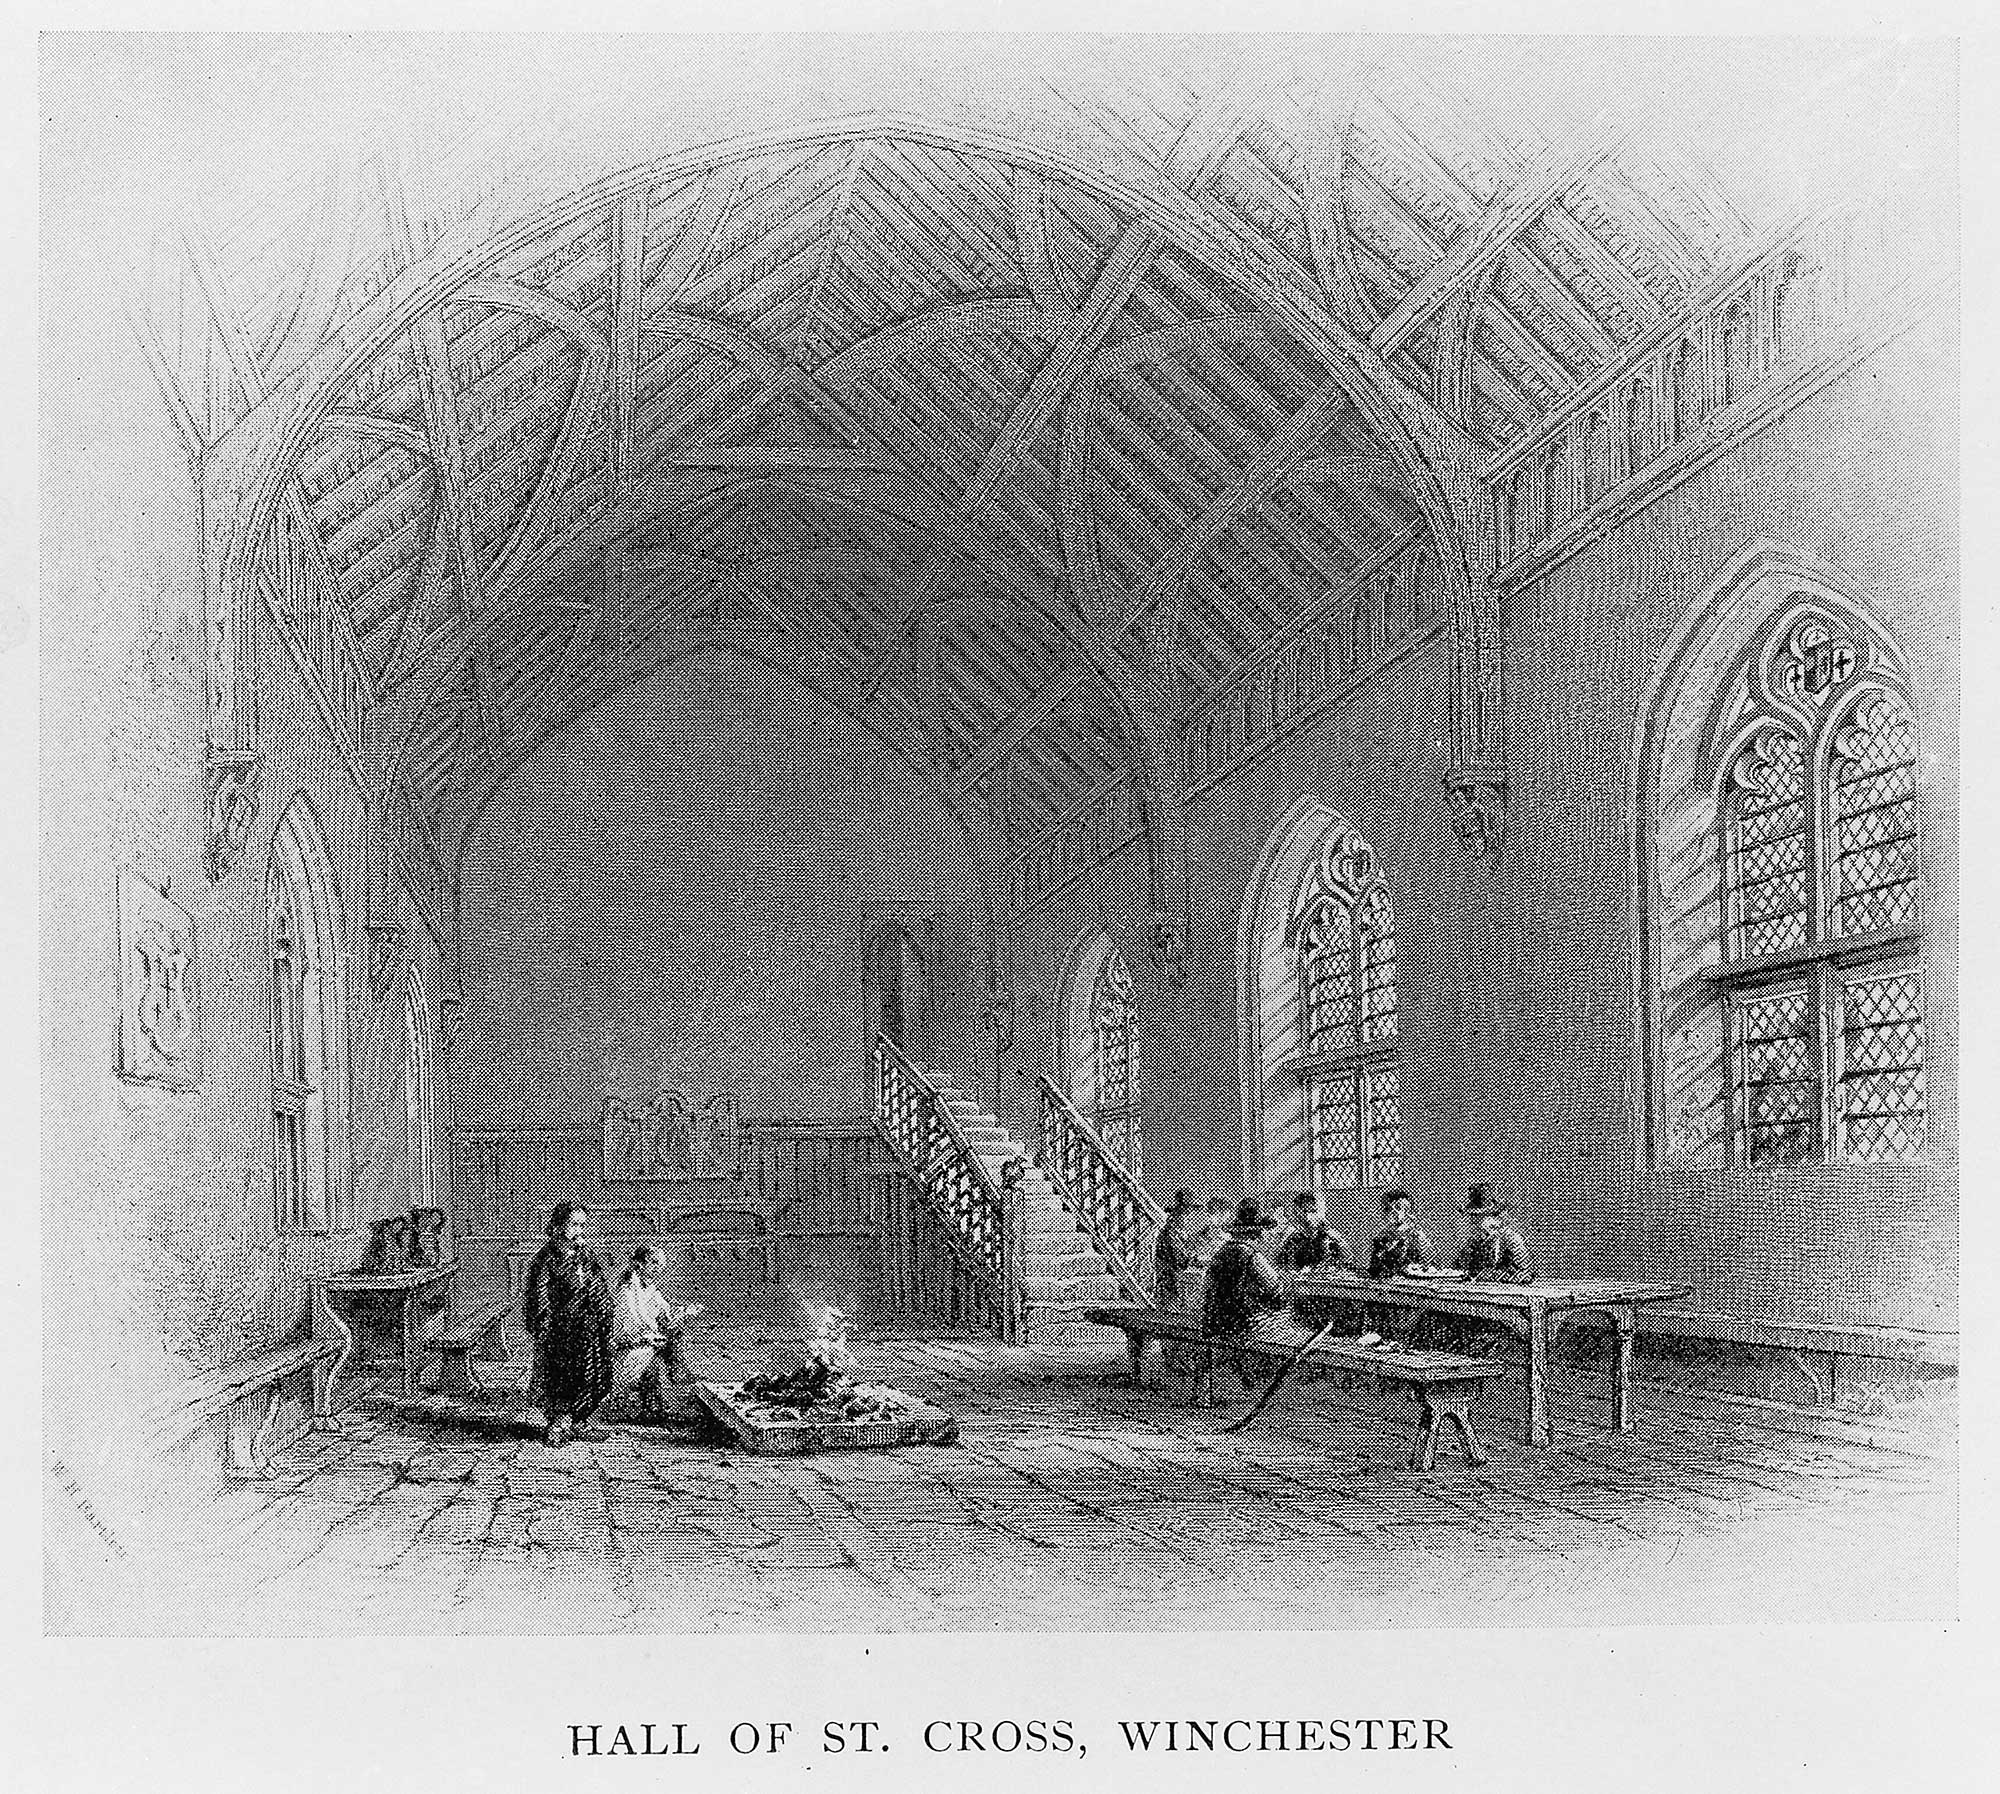 A drawing of people eating in the infirmary hall of St Cross, Winchester.